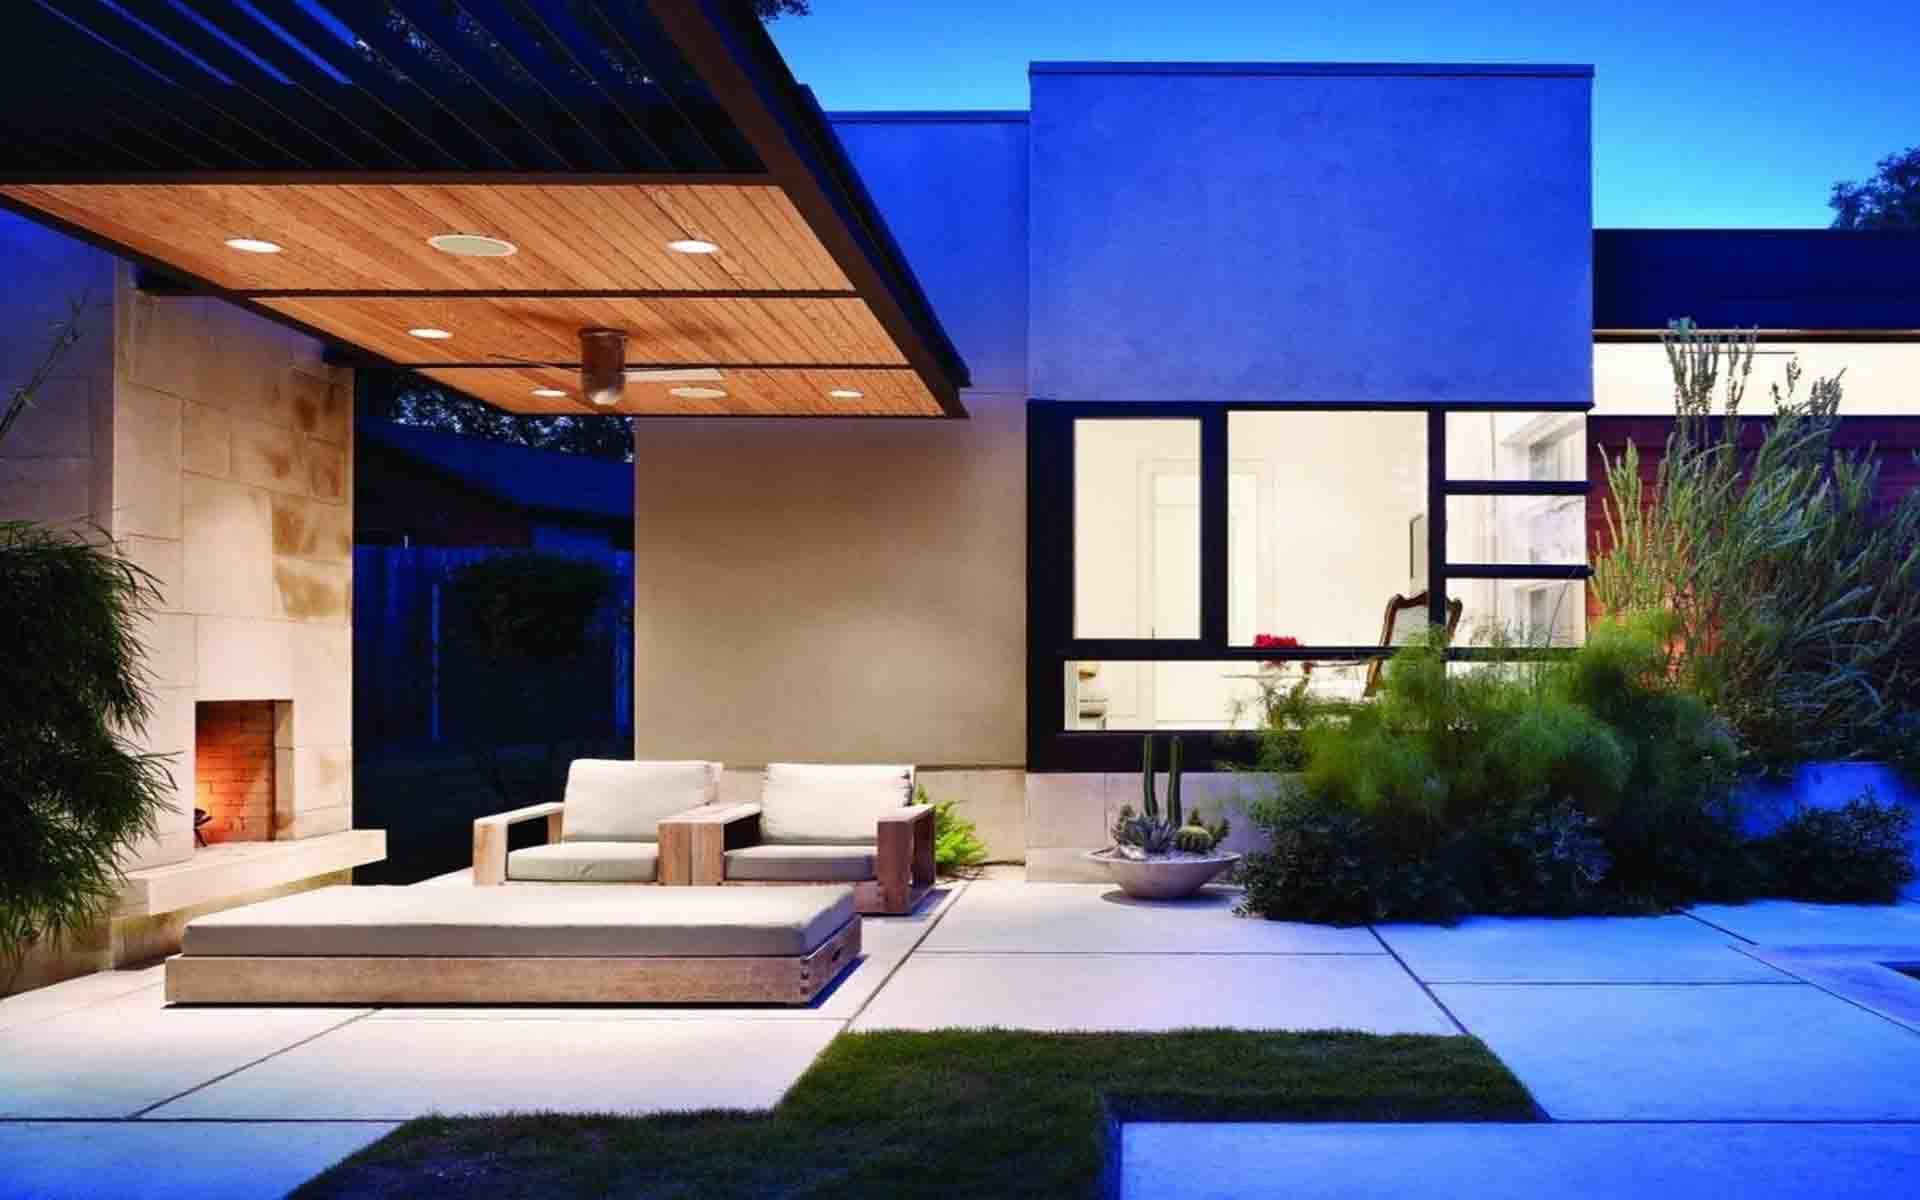 Modern Houses HD Wallpaper is the OTHERS category wallpaper you